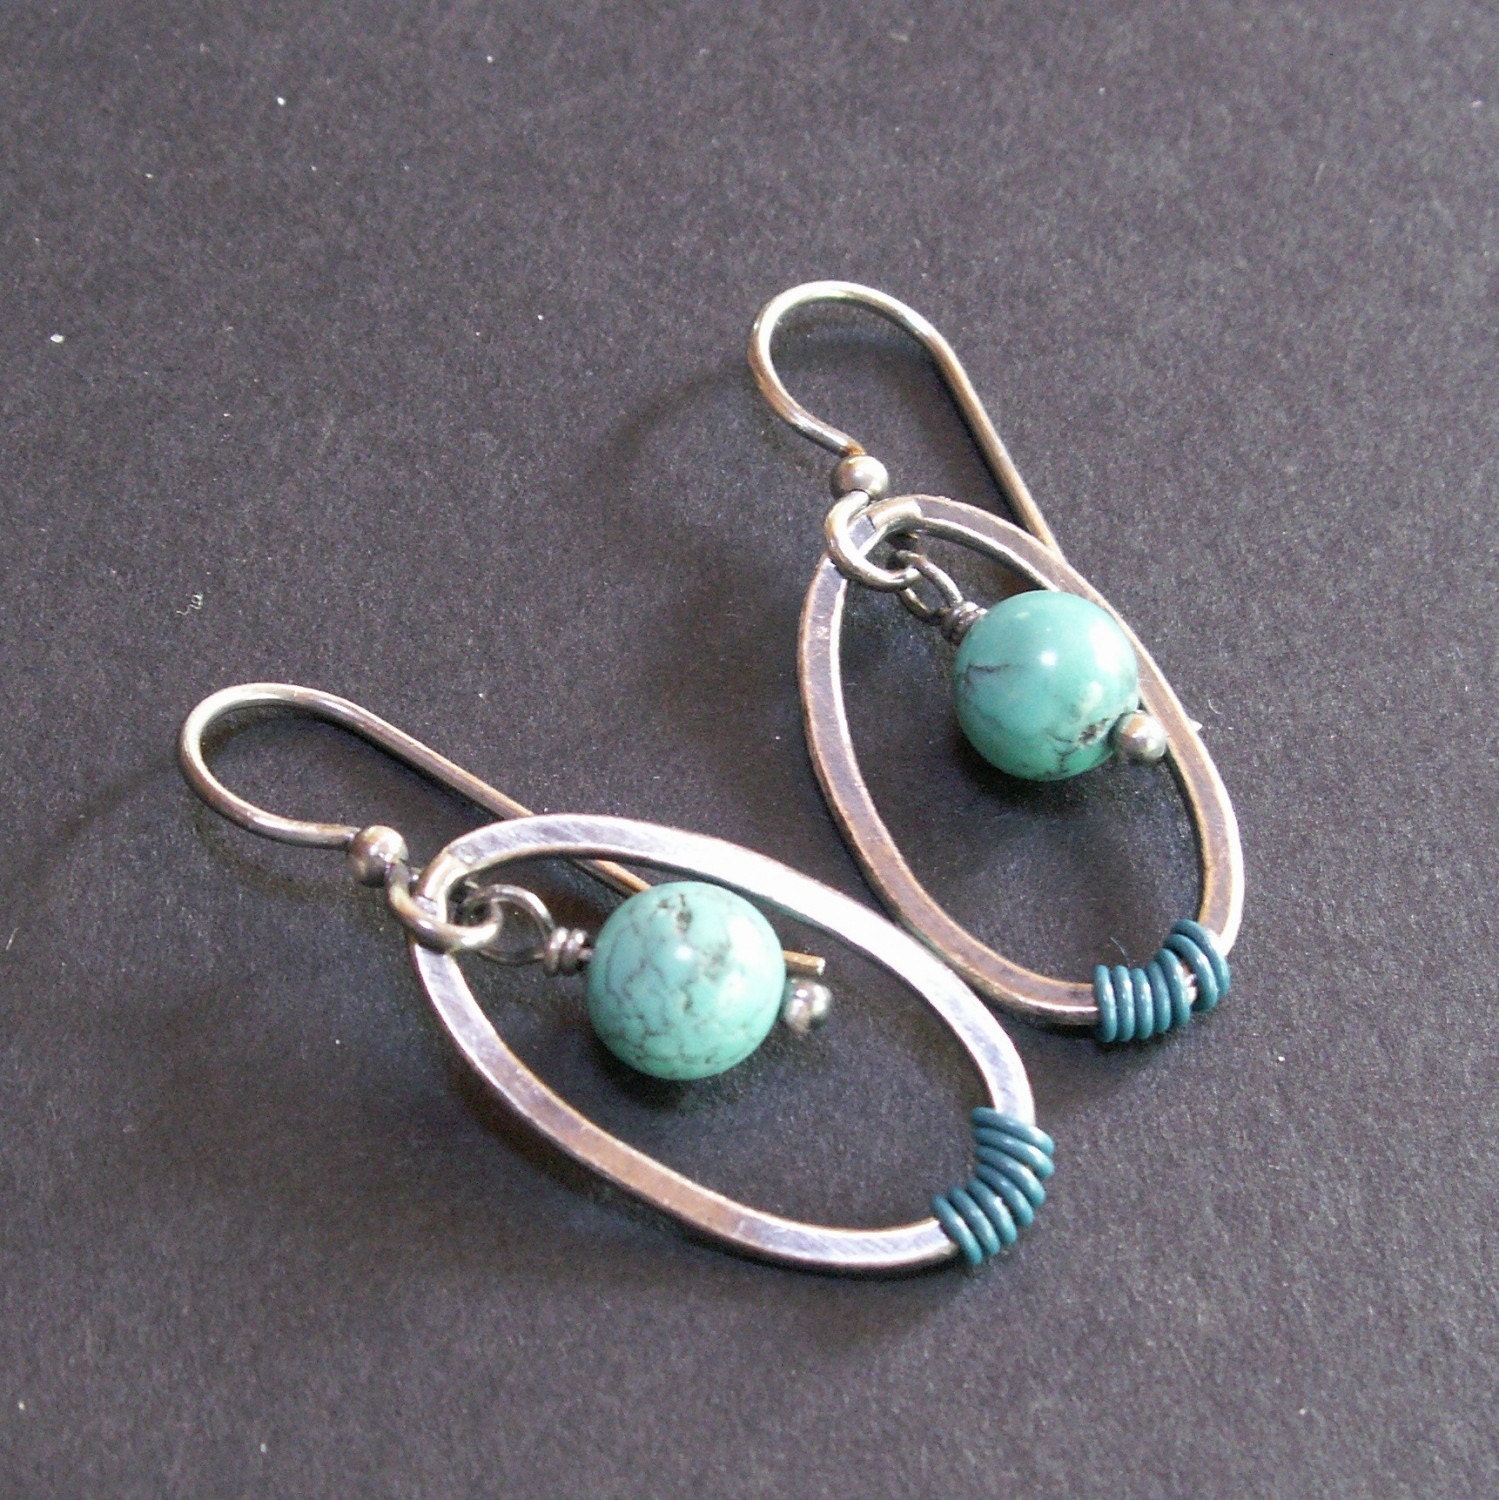 handcrafted jewelry earrings sterling silver turquoise